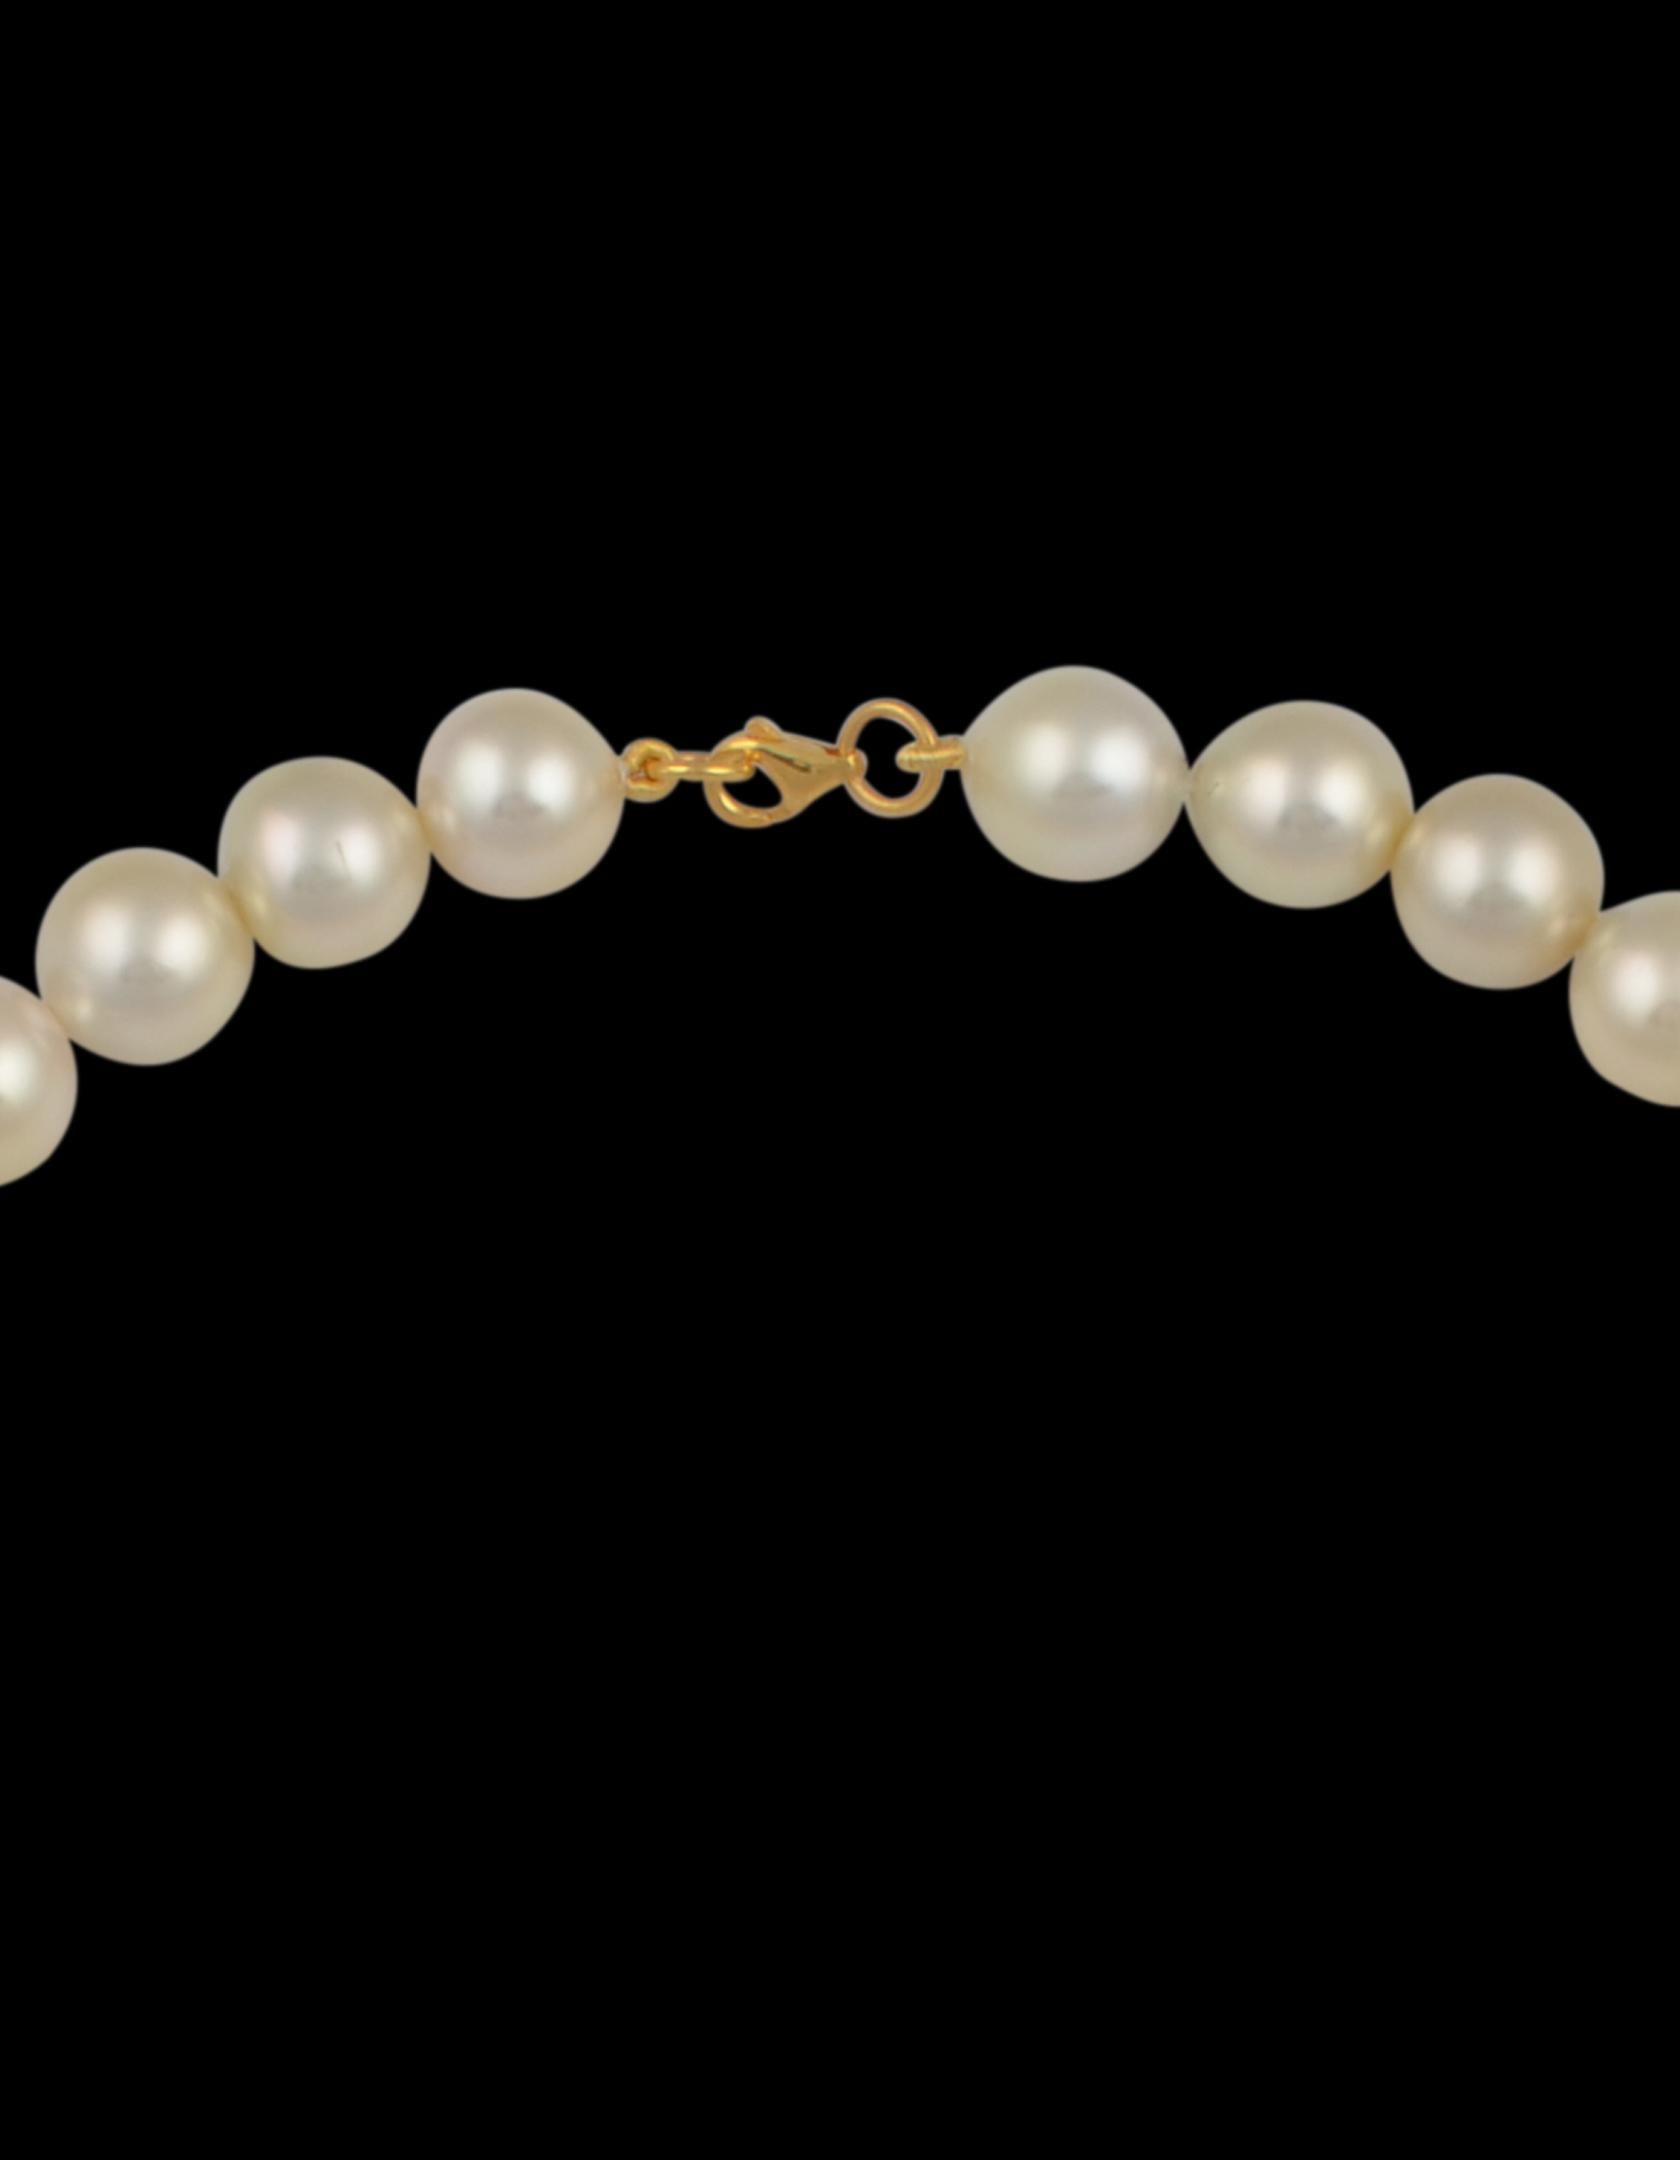 Graduating Cream Color South Sea Pearls Necklace 14 Karat Yellow Gold Clasp For Sale 2